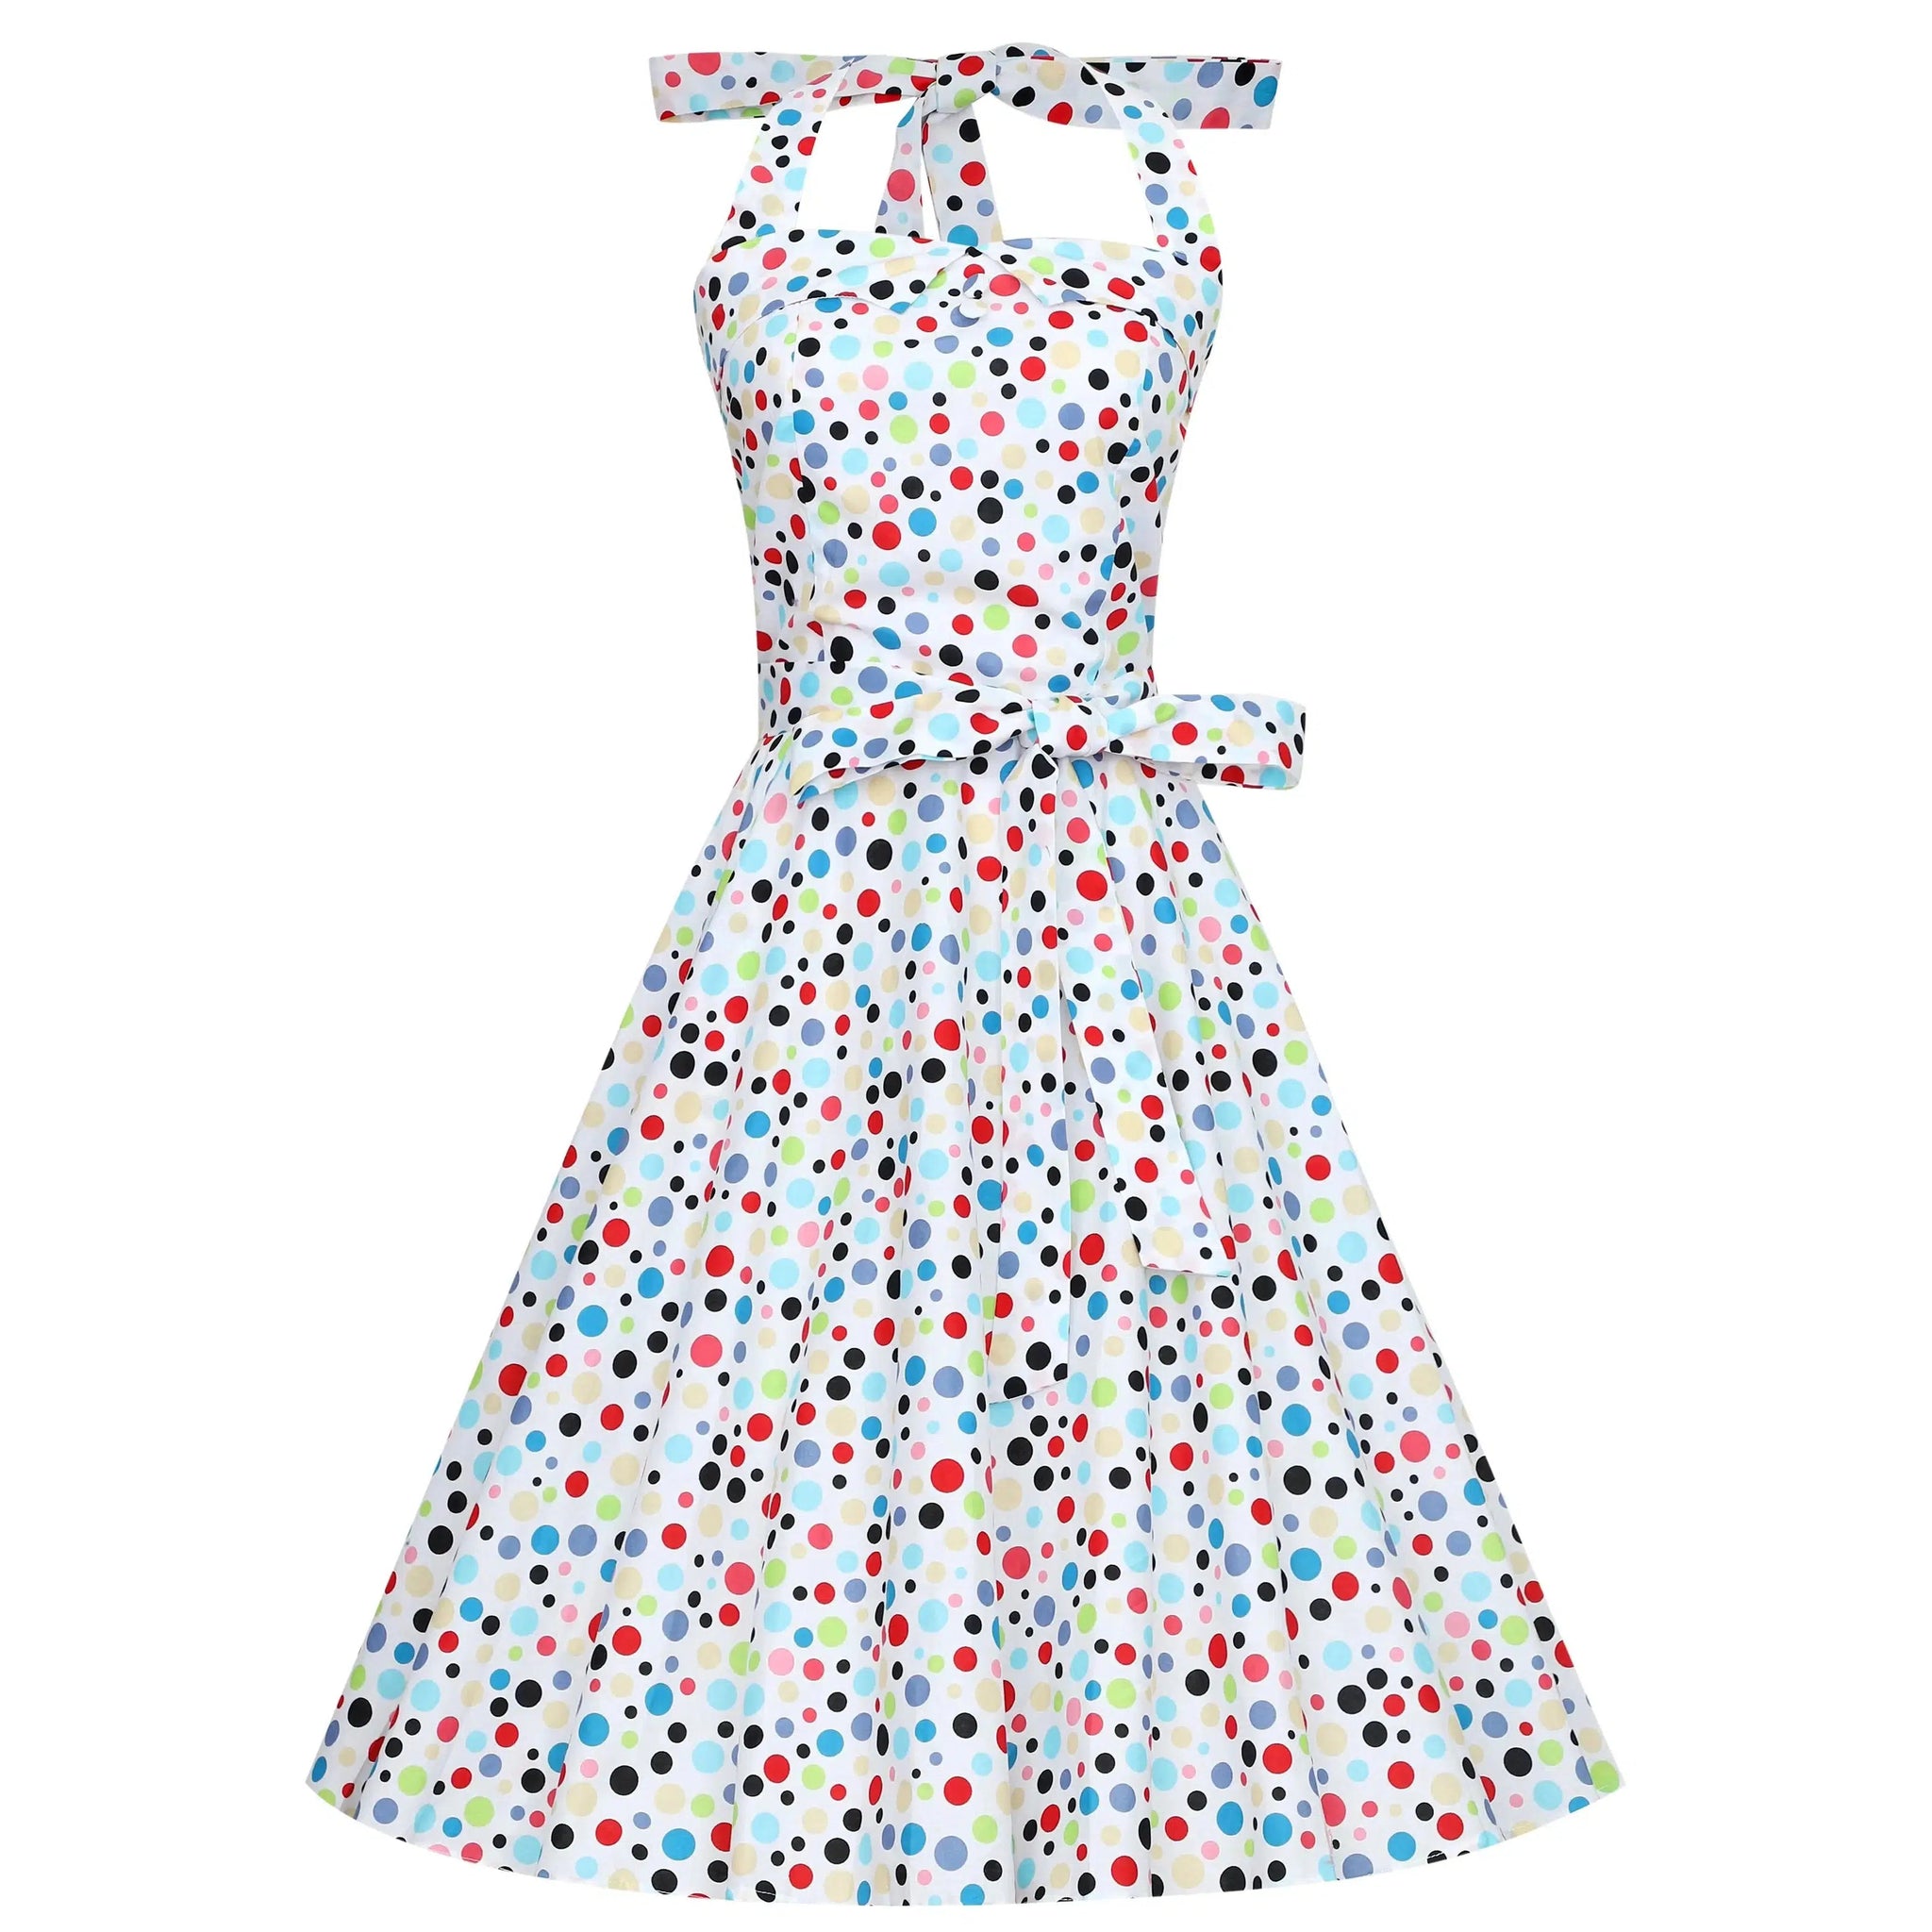 Dolly & Dotty Sophie Dress in Colorful Polka Dots – Glitz Glam and Rebellion